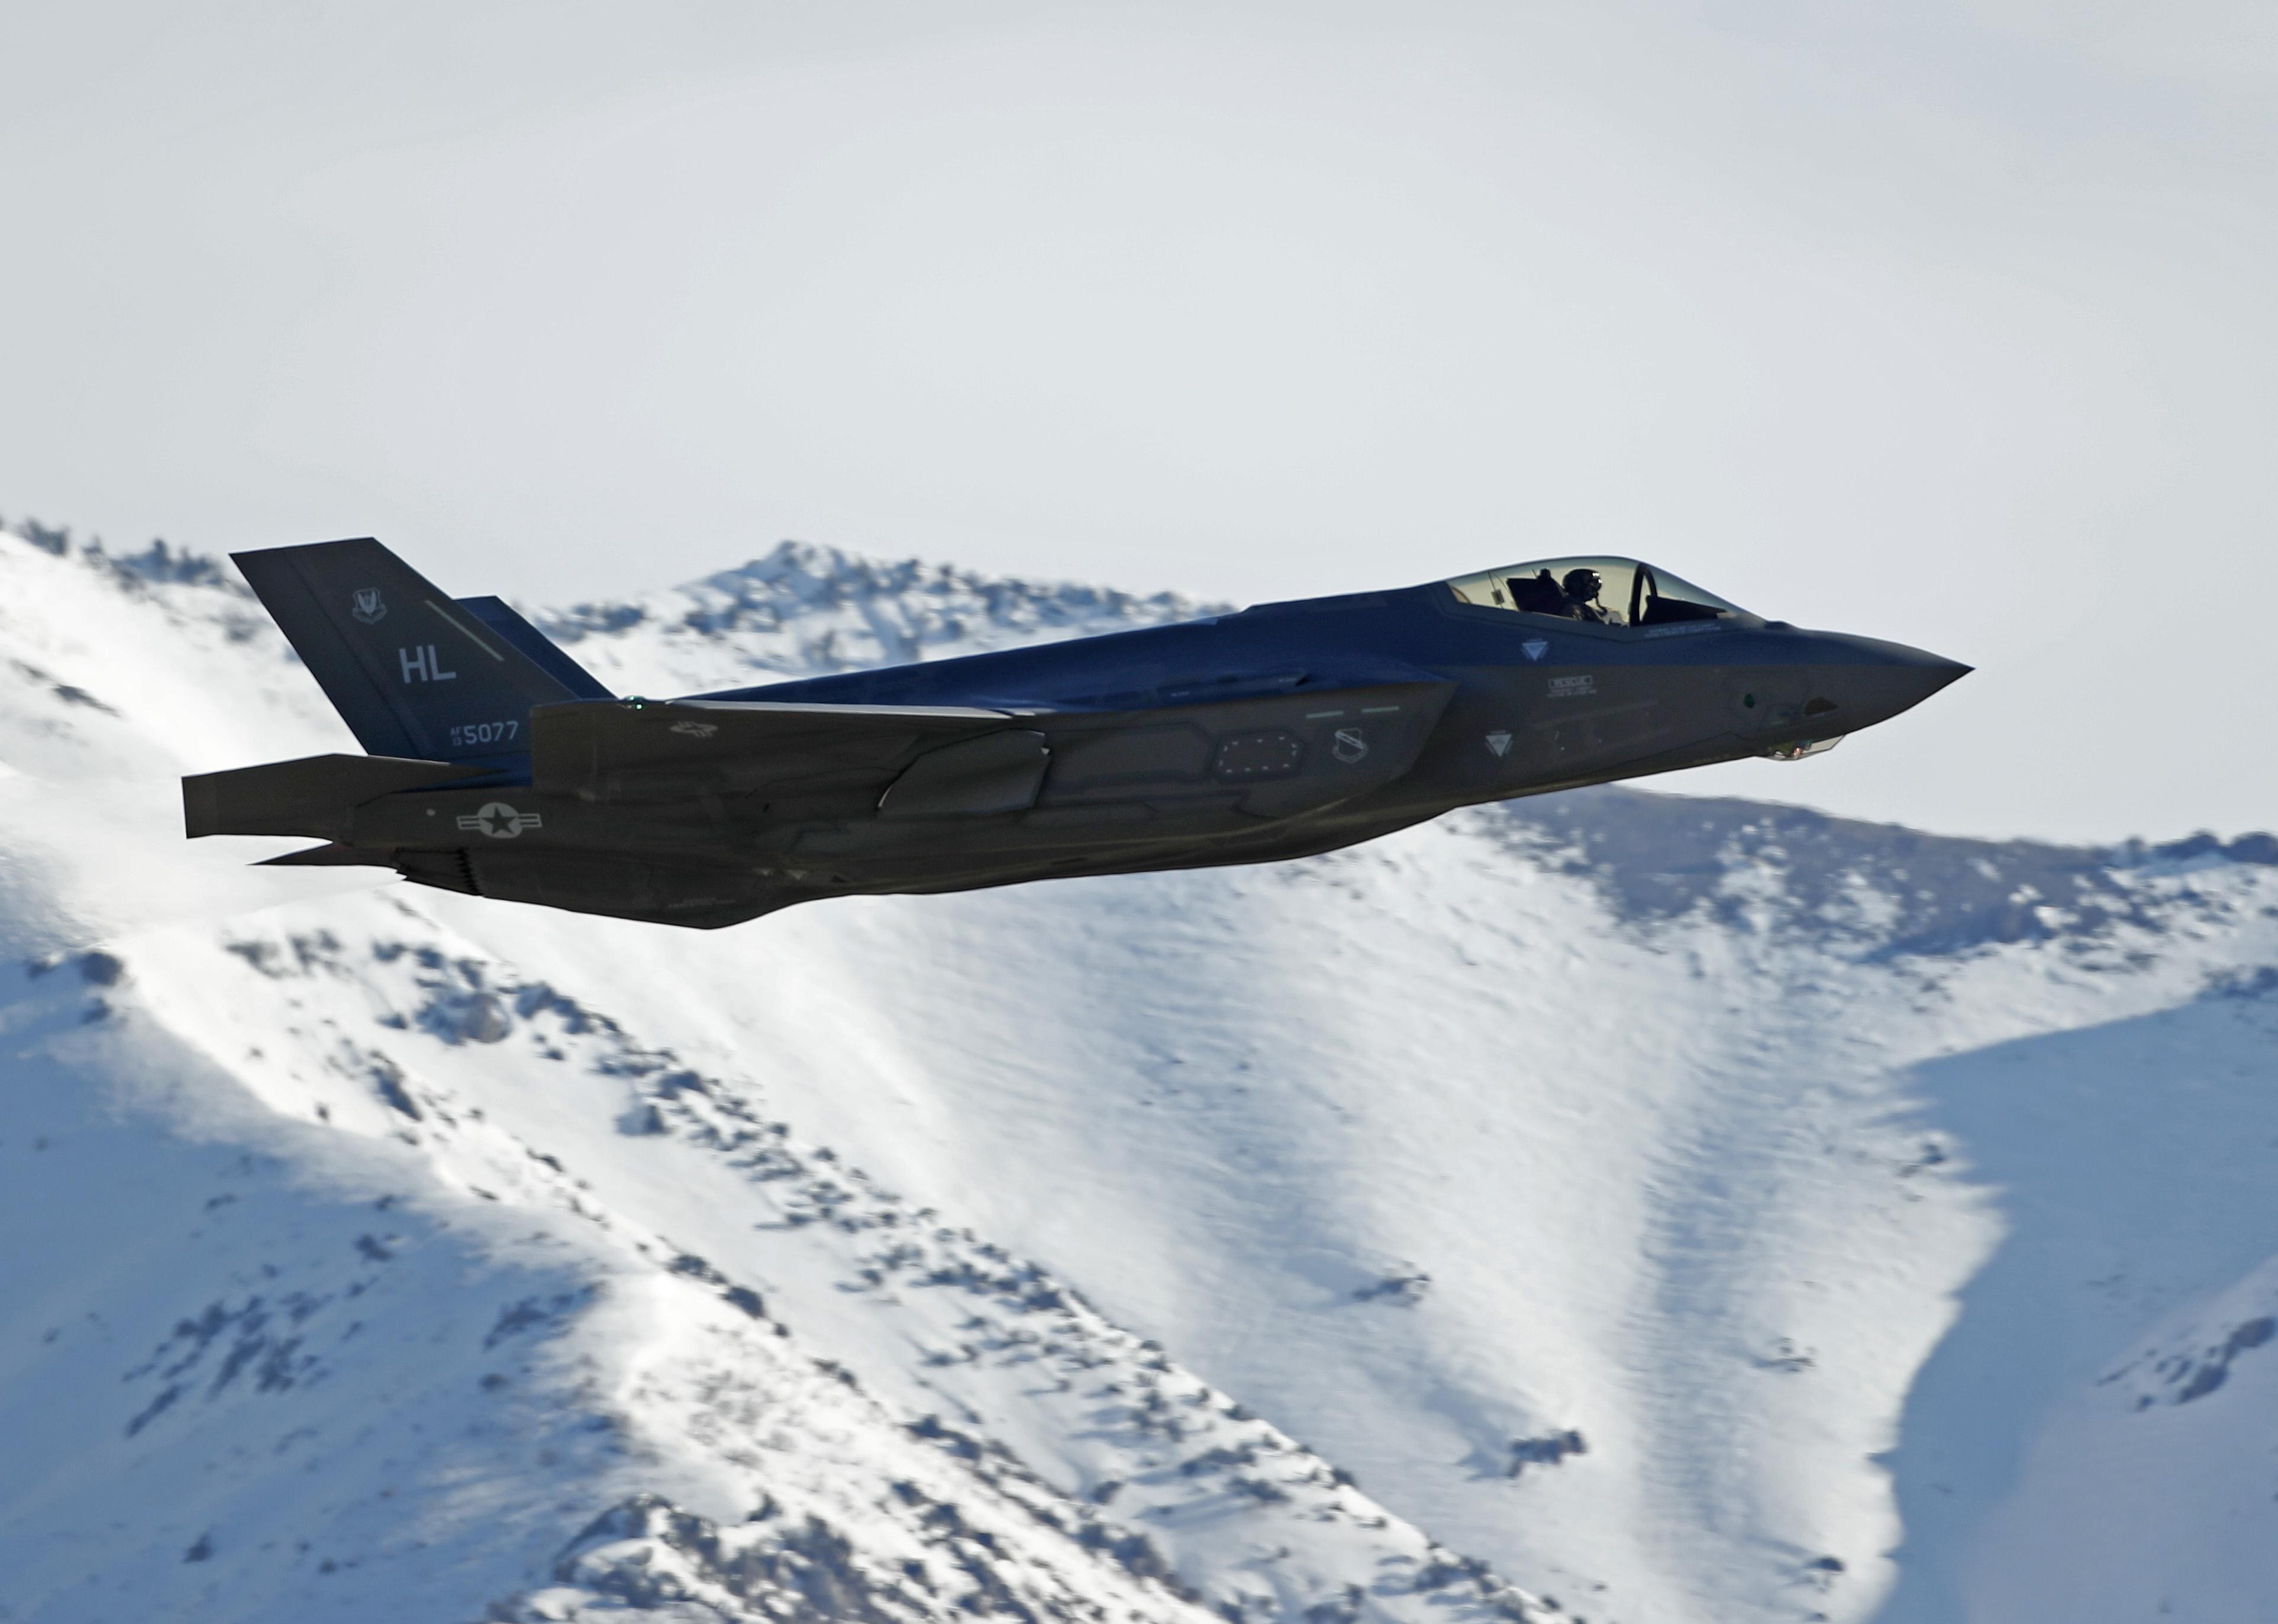 An F-35 jet flying over snowy mountains.